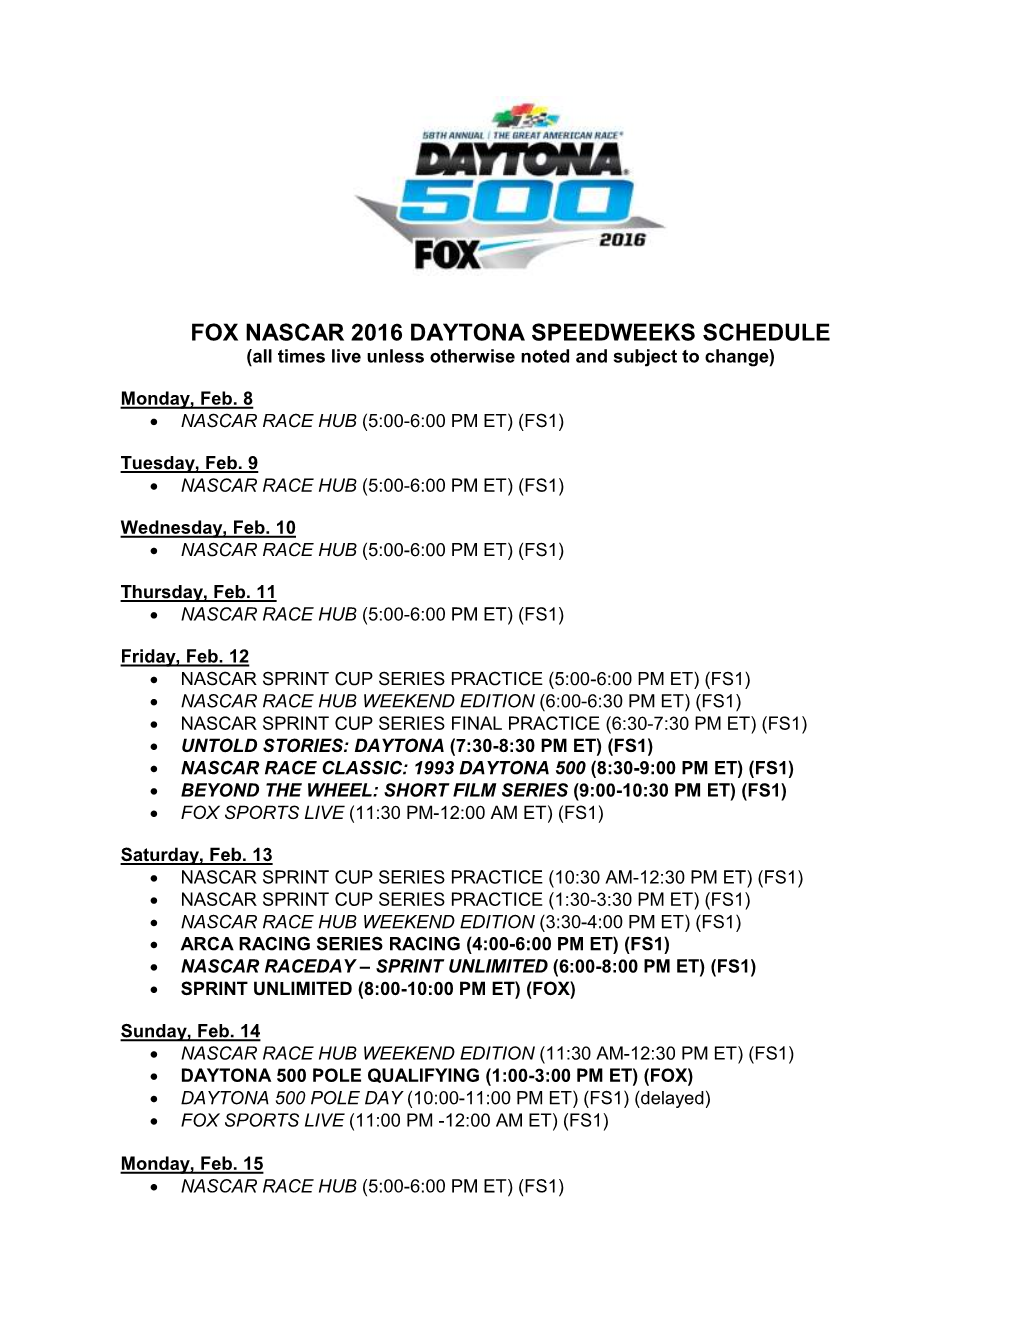 FOX NASCAR 2016 DAYTONA SPEEDWEEKS SCHEDULE (All Times Live Unless Otherwise Noted and Subject to Change)